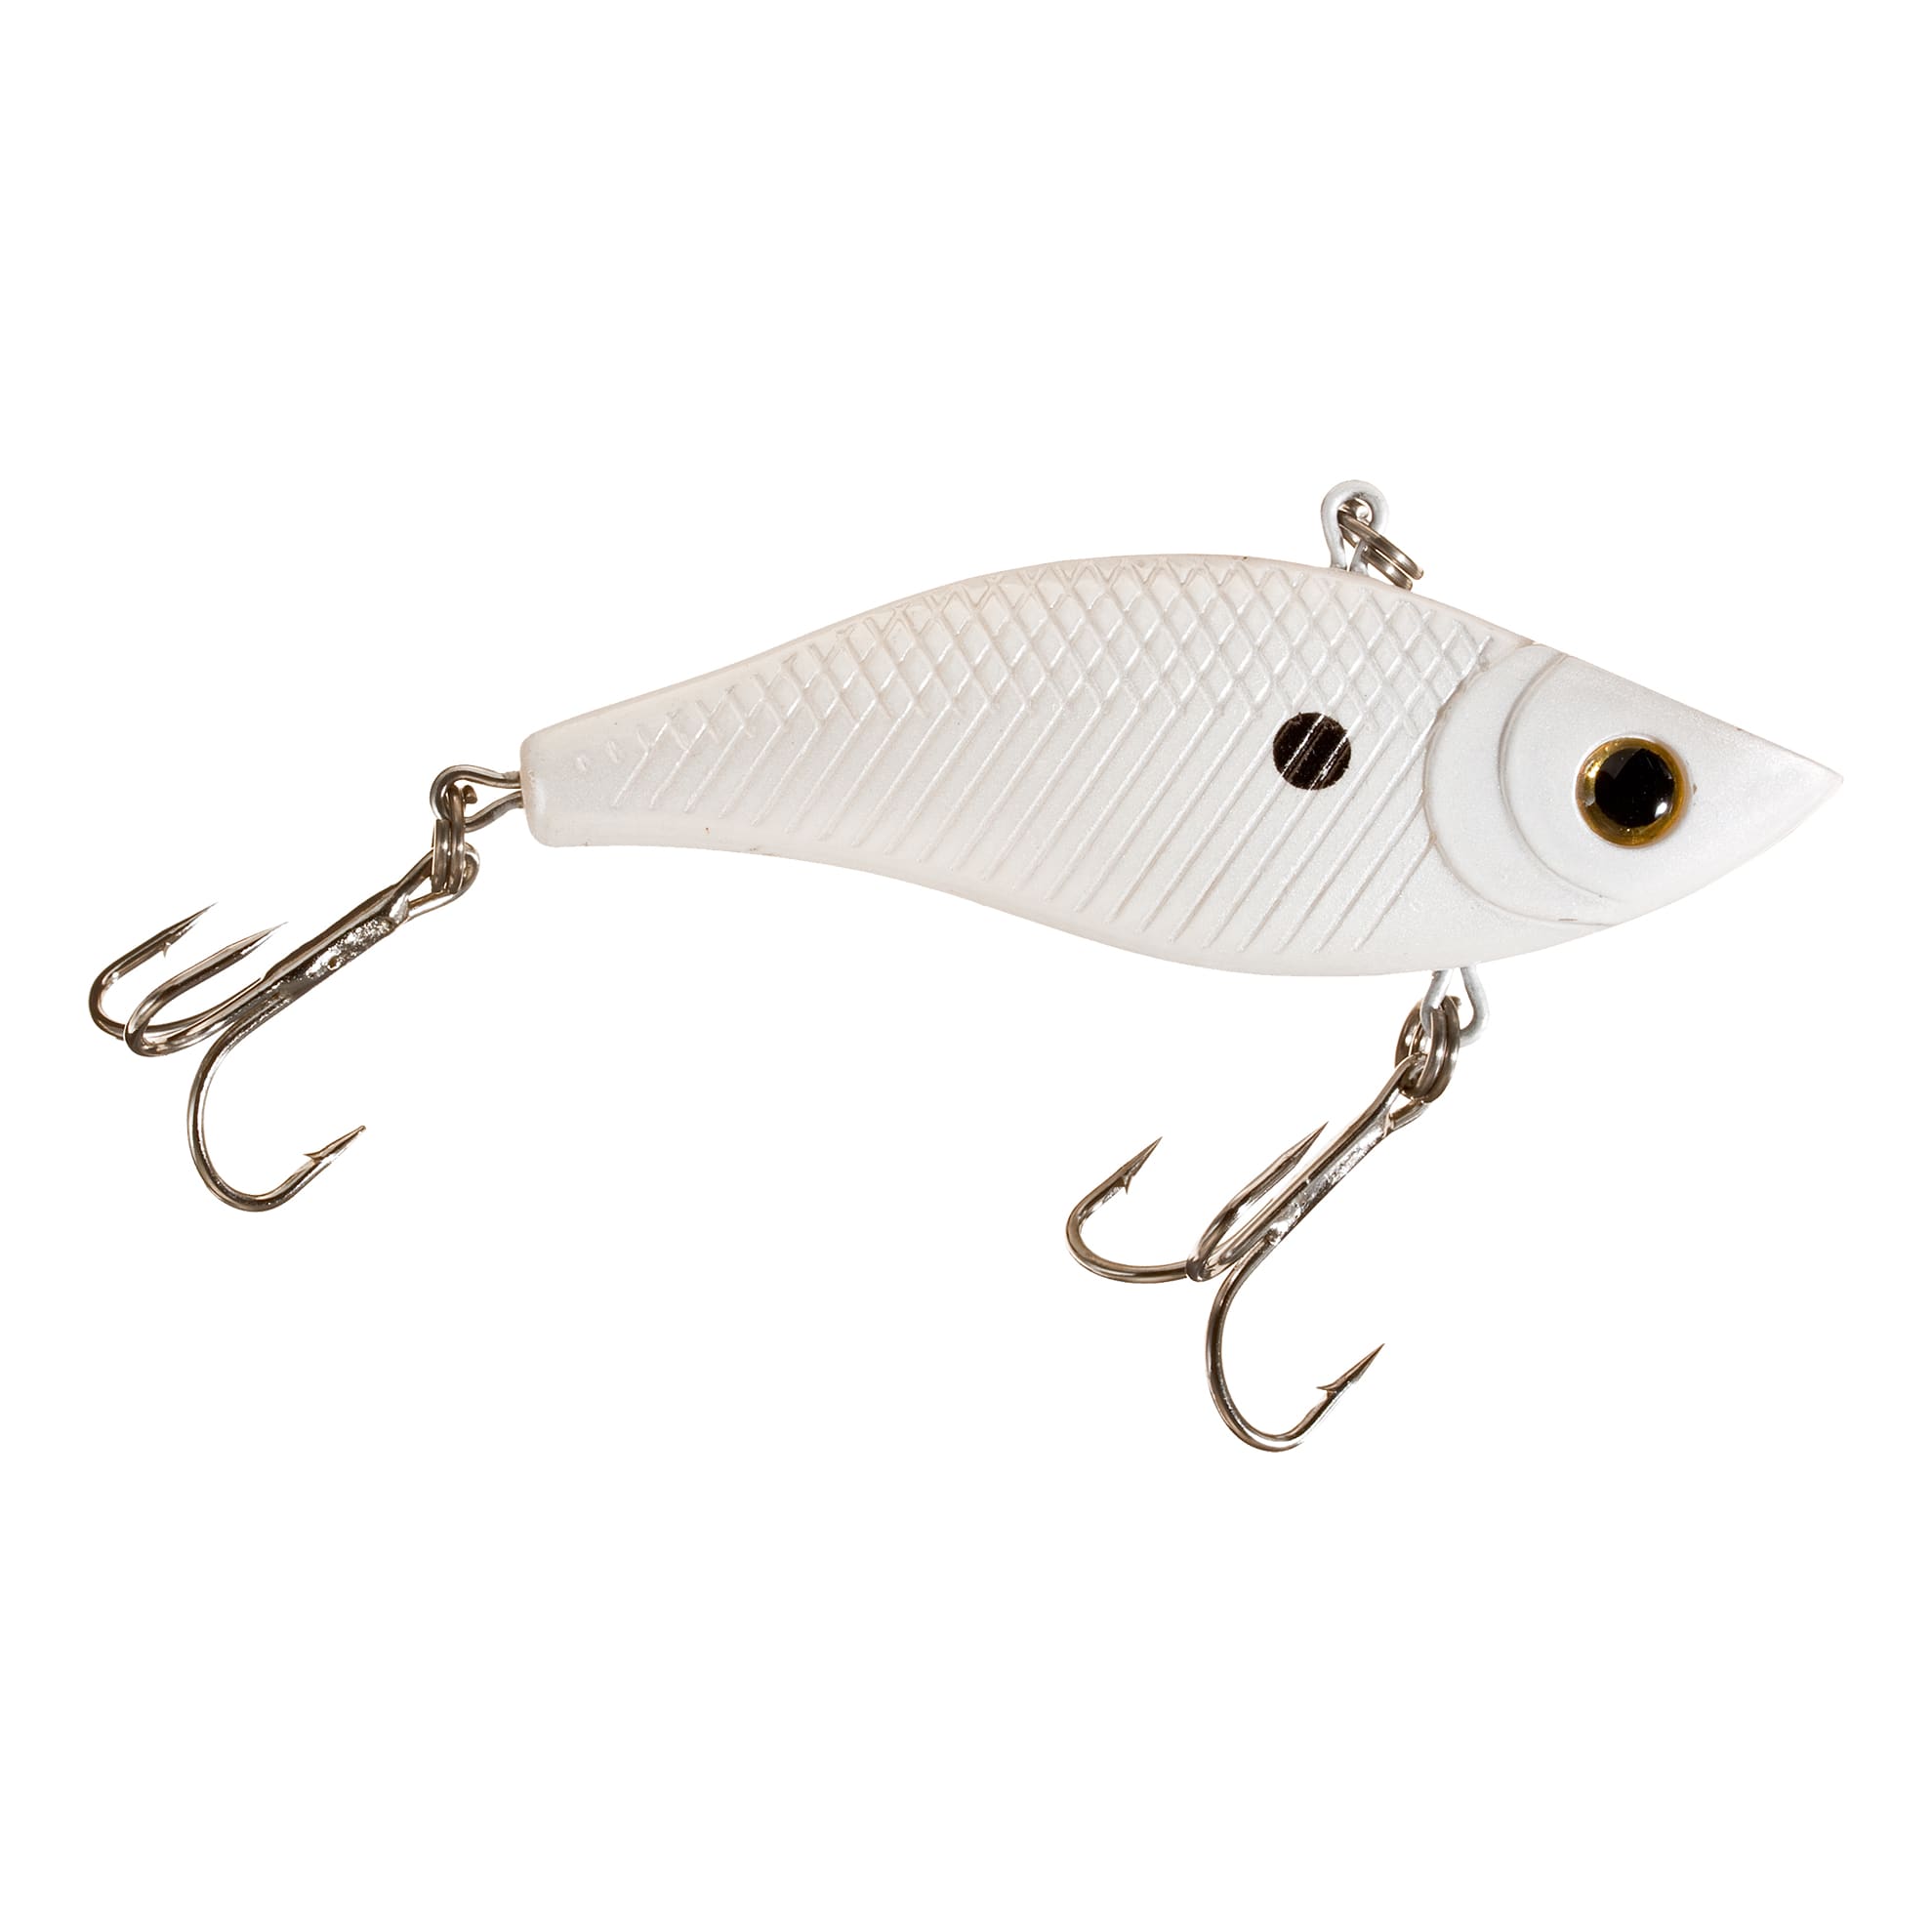 Bass Pro Shops® Tourney Special Rattle Bait - White Shad